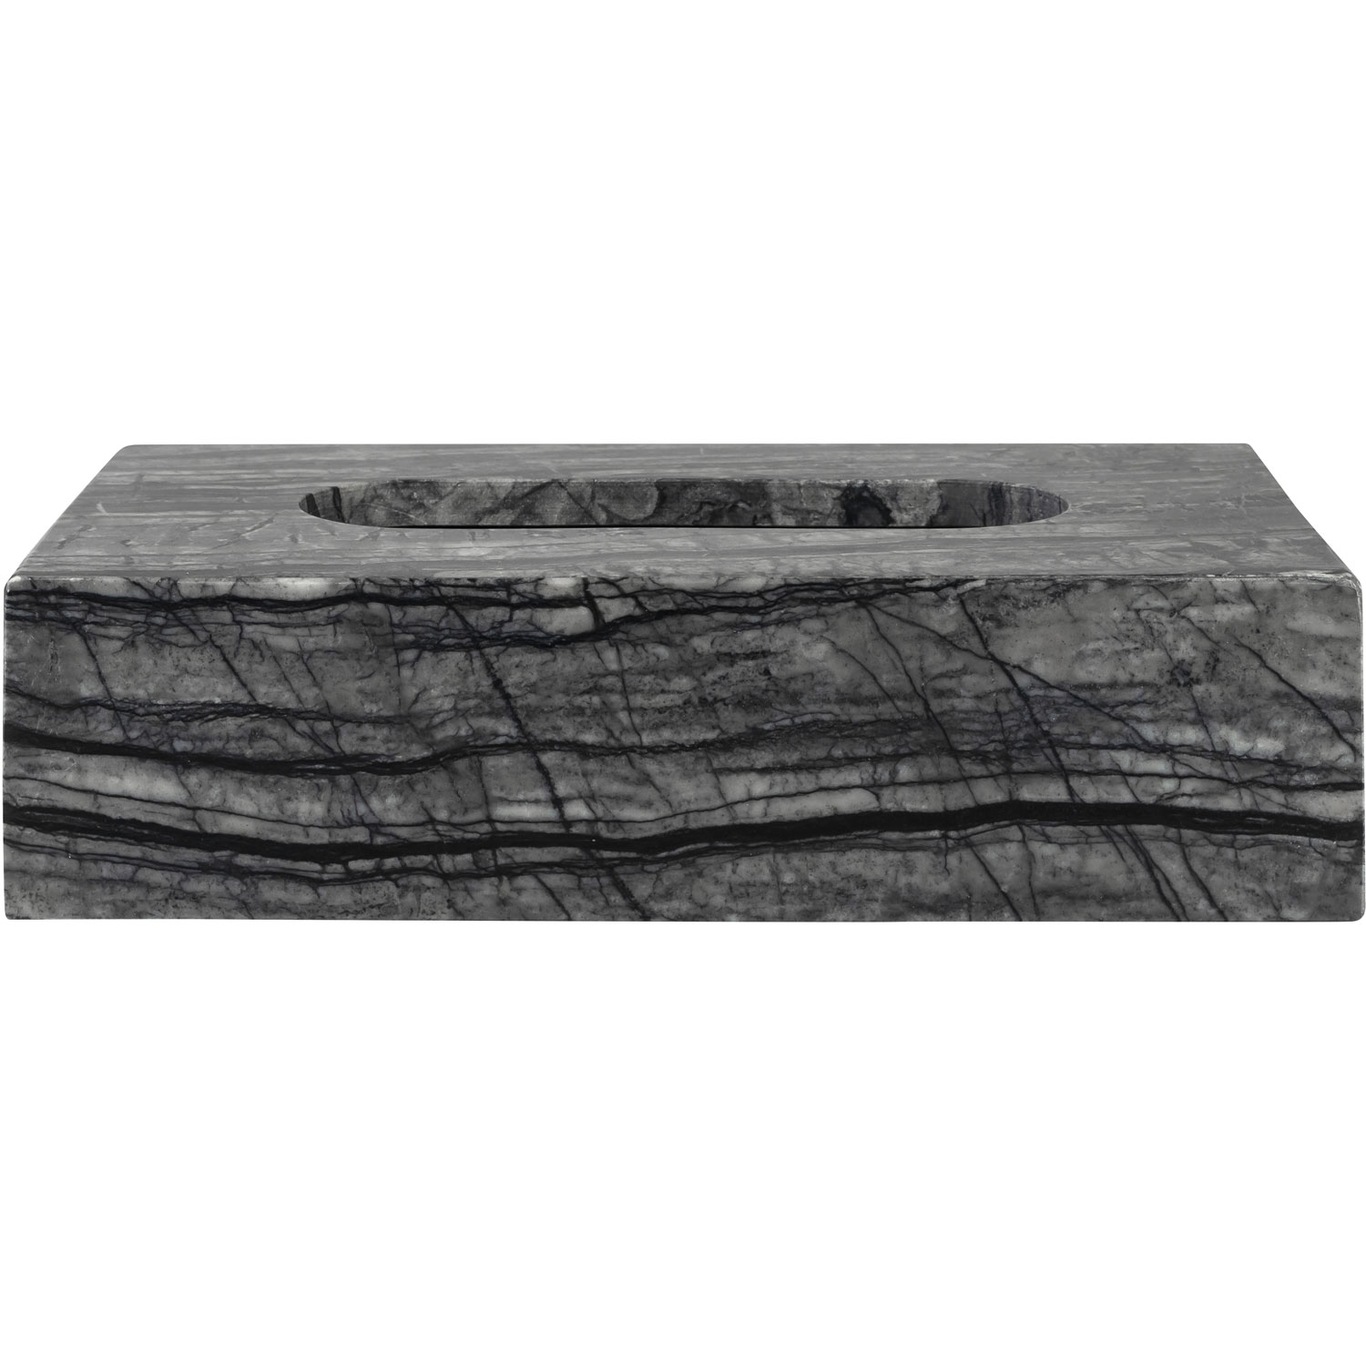 MARBLE Storage Box For Tissues, Black/Grey